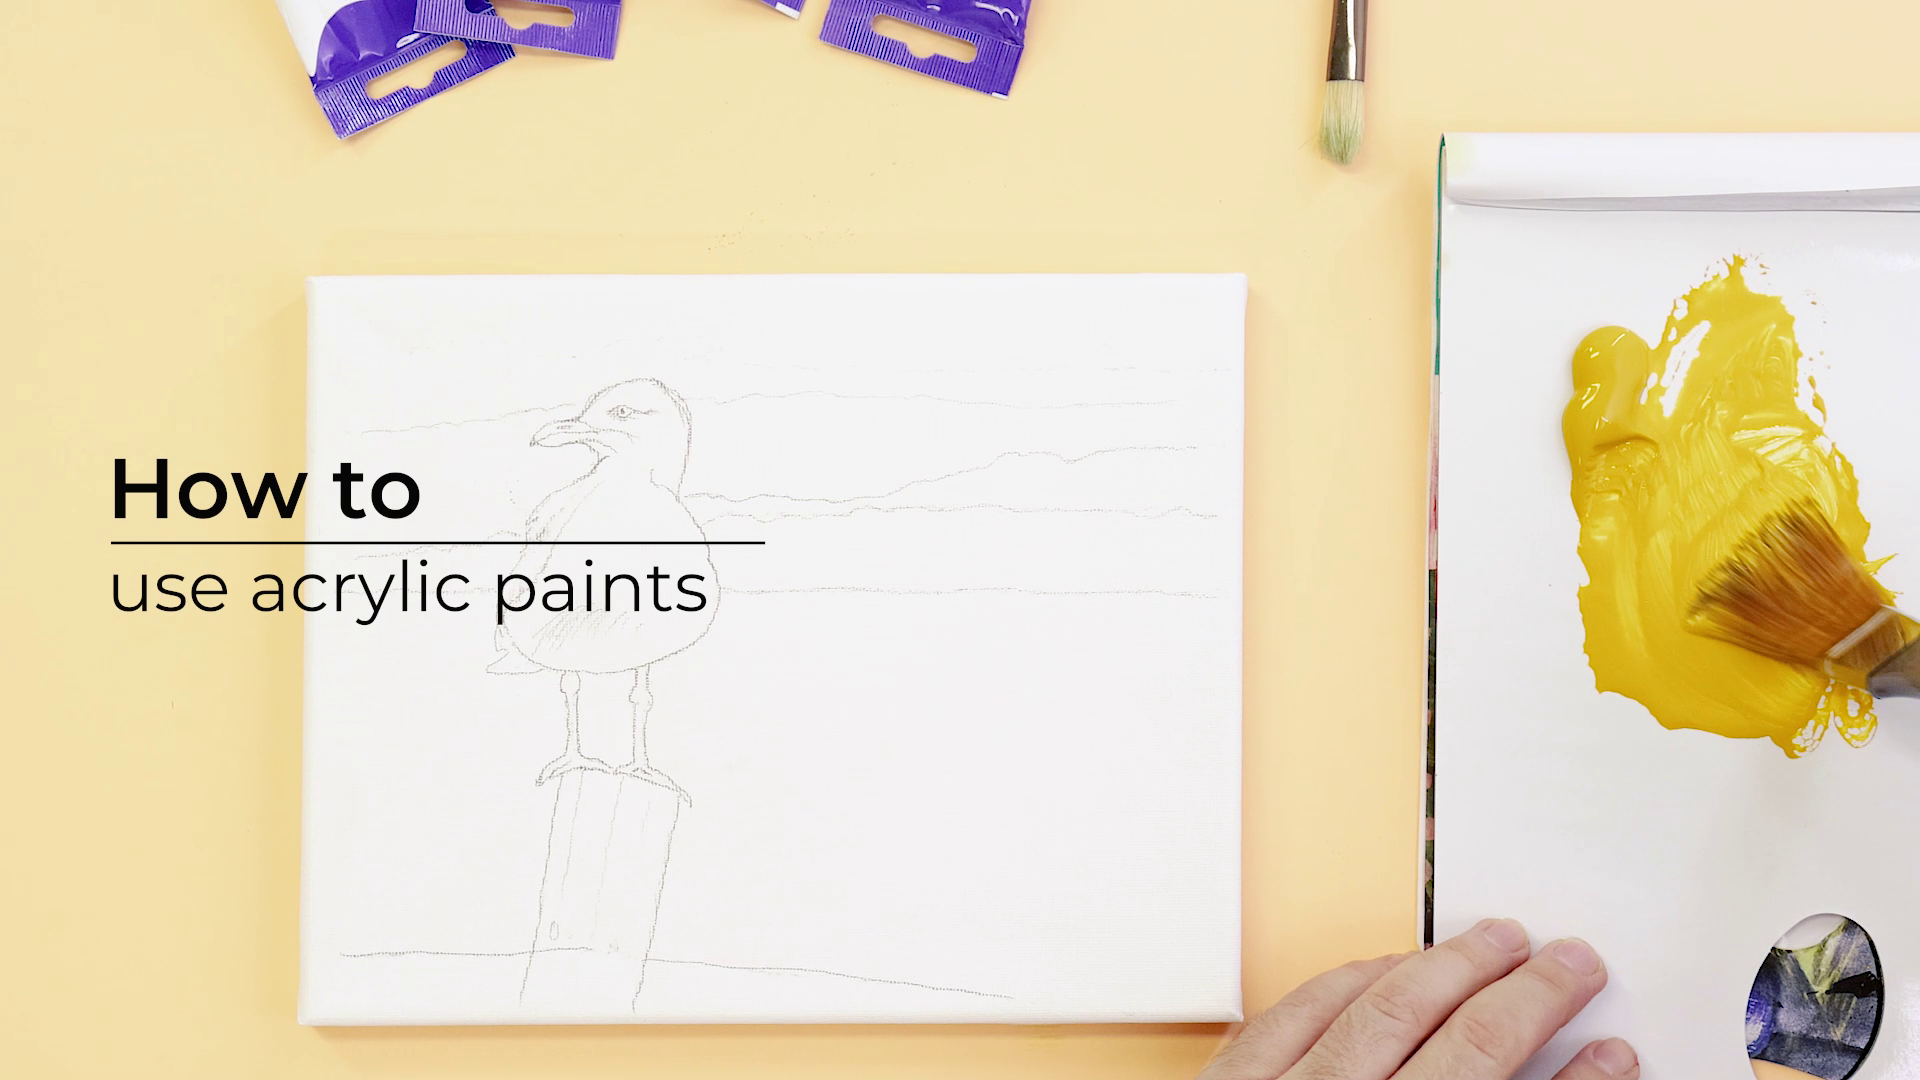 4. Video thumbnail that reads 'how to use acrylic paints' with a seagull drawing and yellow paint